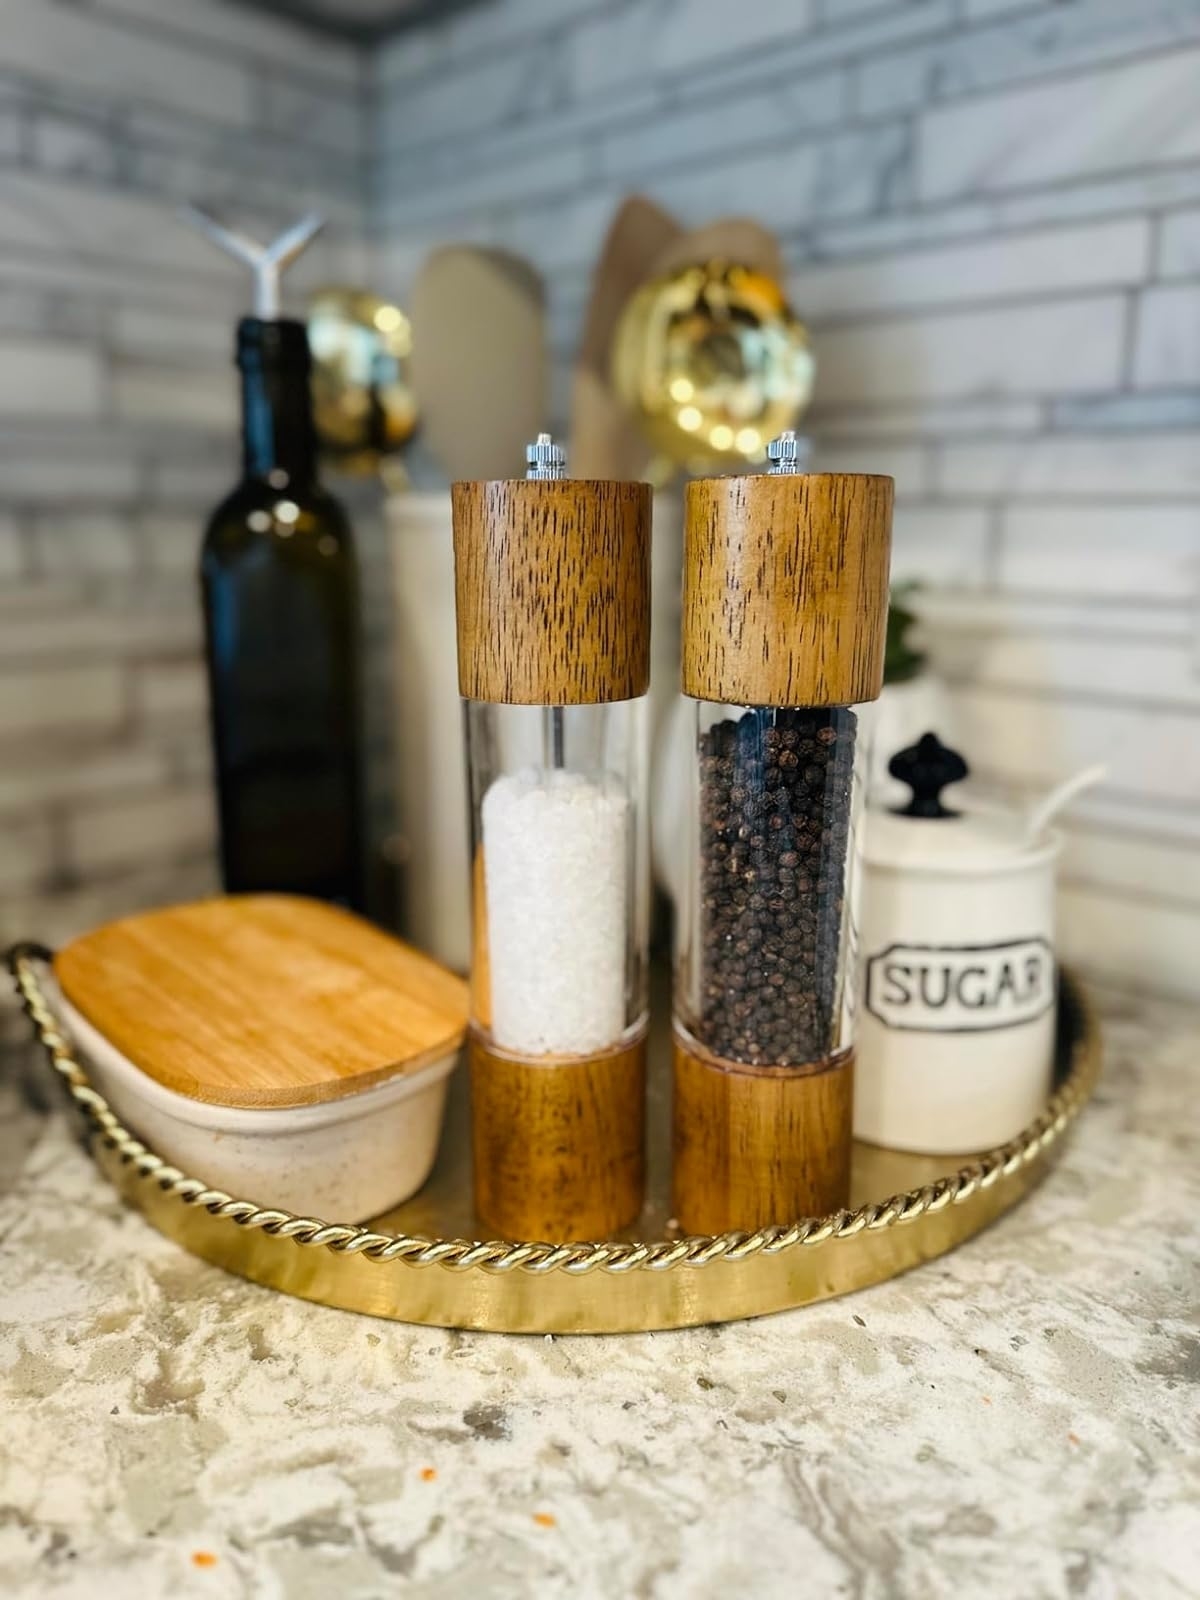 Salt and pepper grinders on a tray with kitchen accessories for a stylish table setting